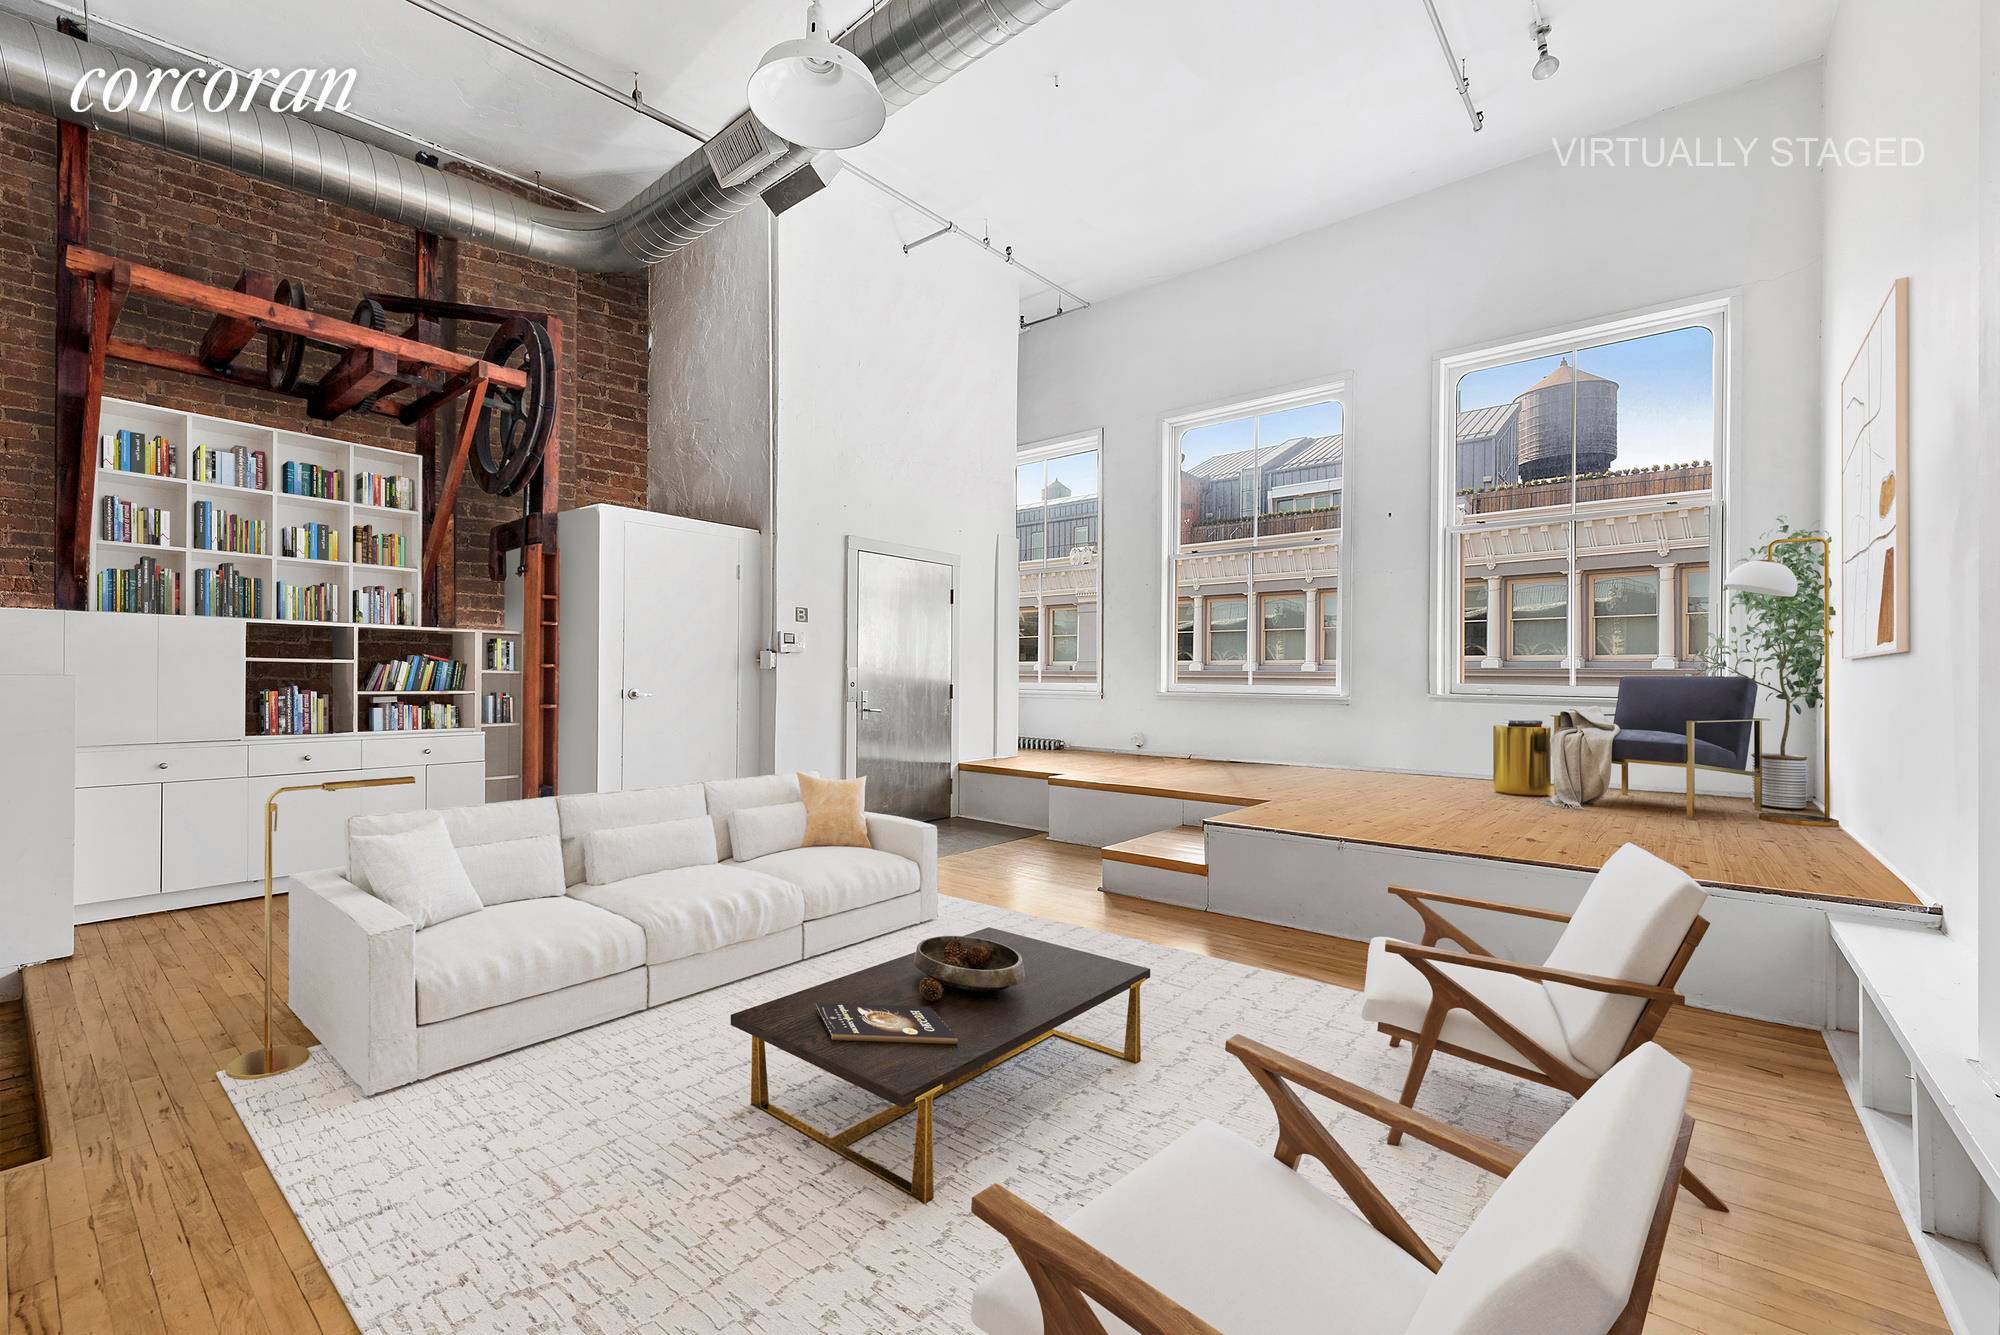 Welcome to this spectacular keyed elevator loft located in the heart of Soho in a boutique building.